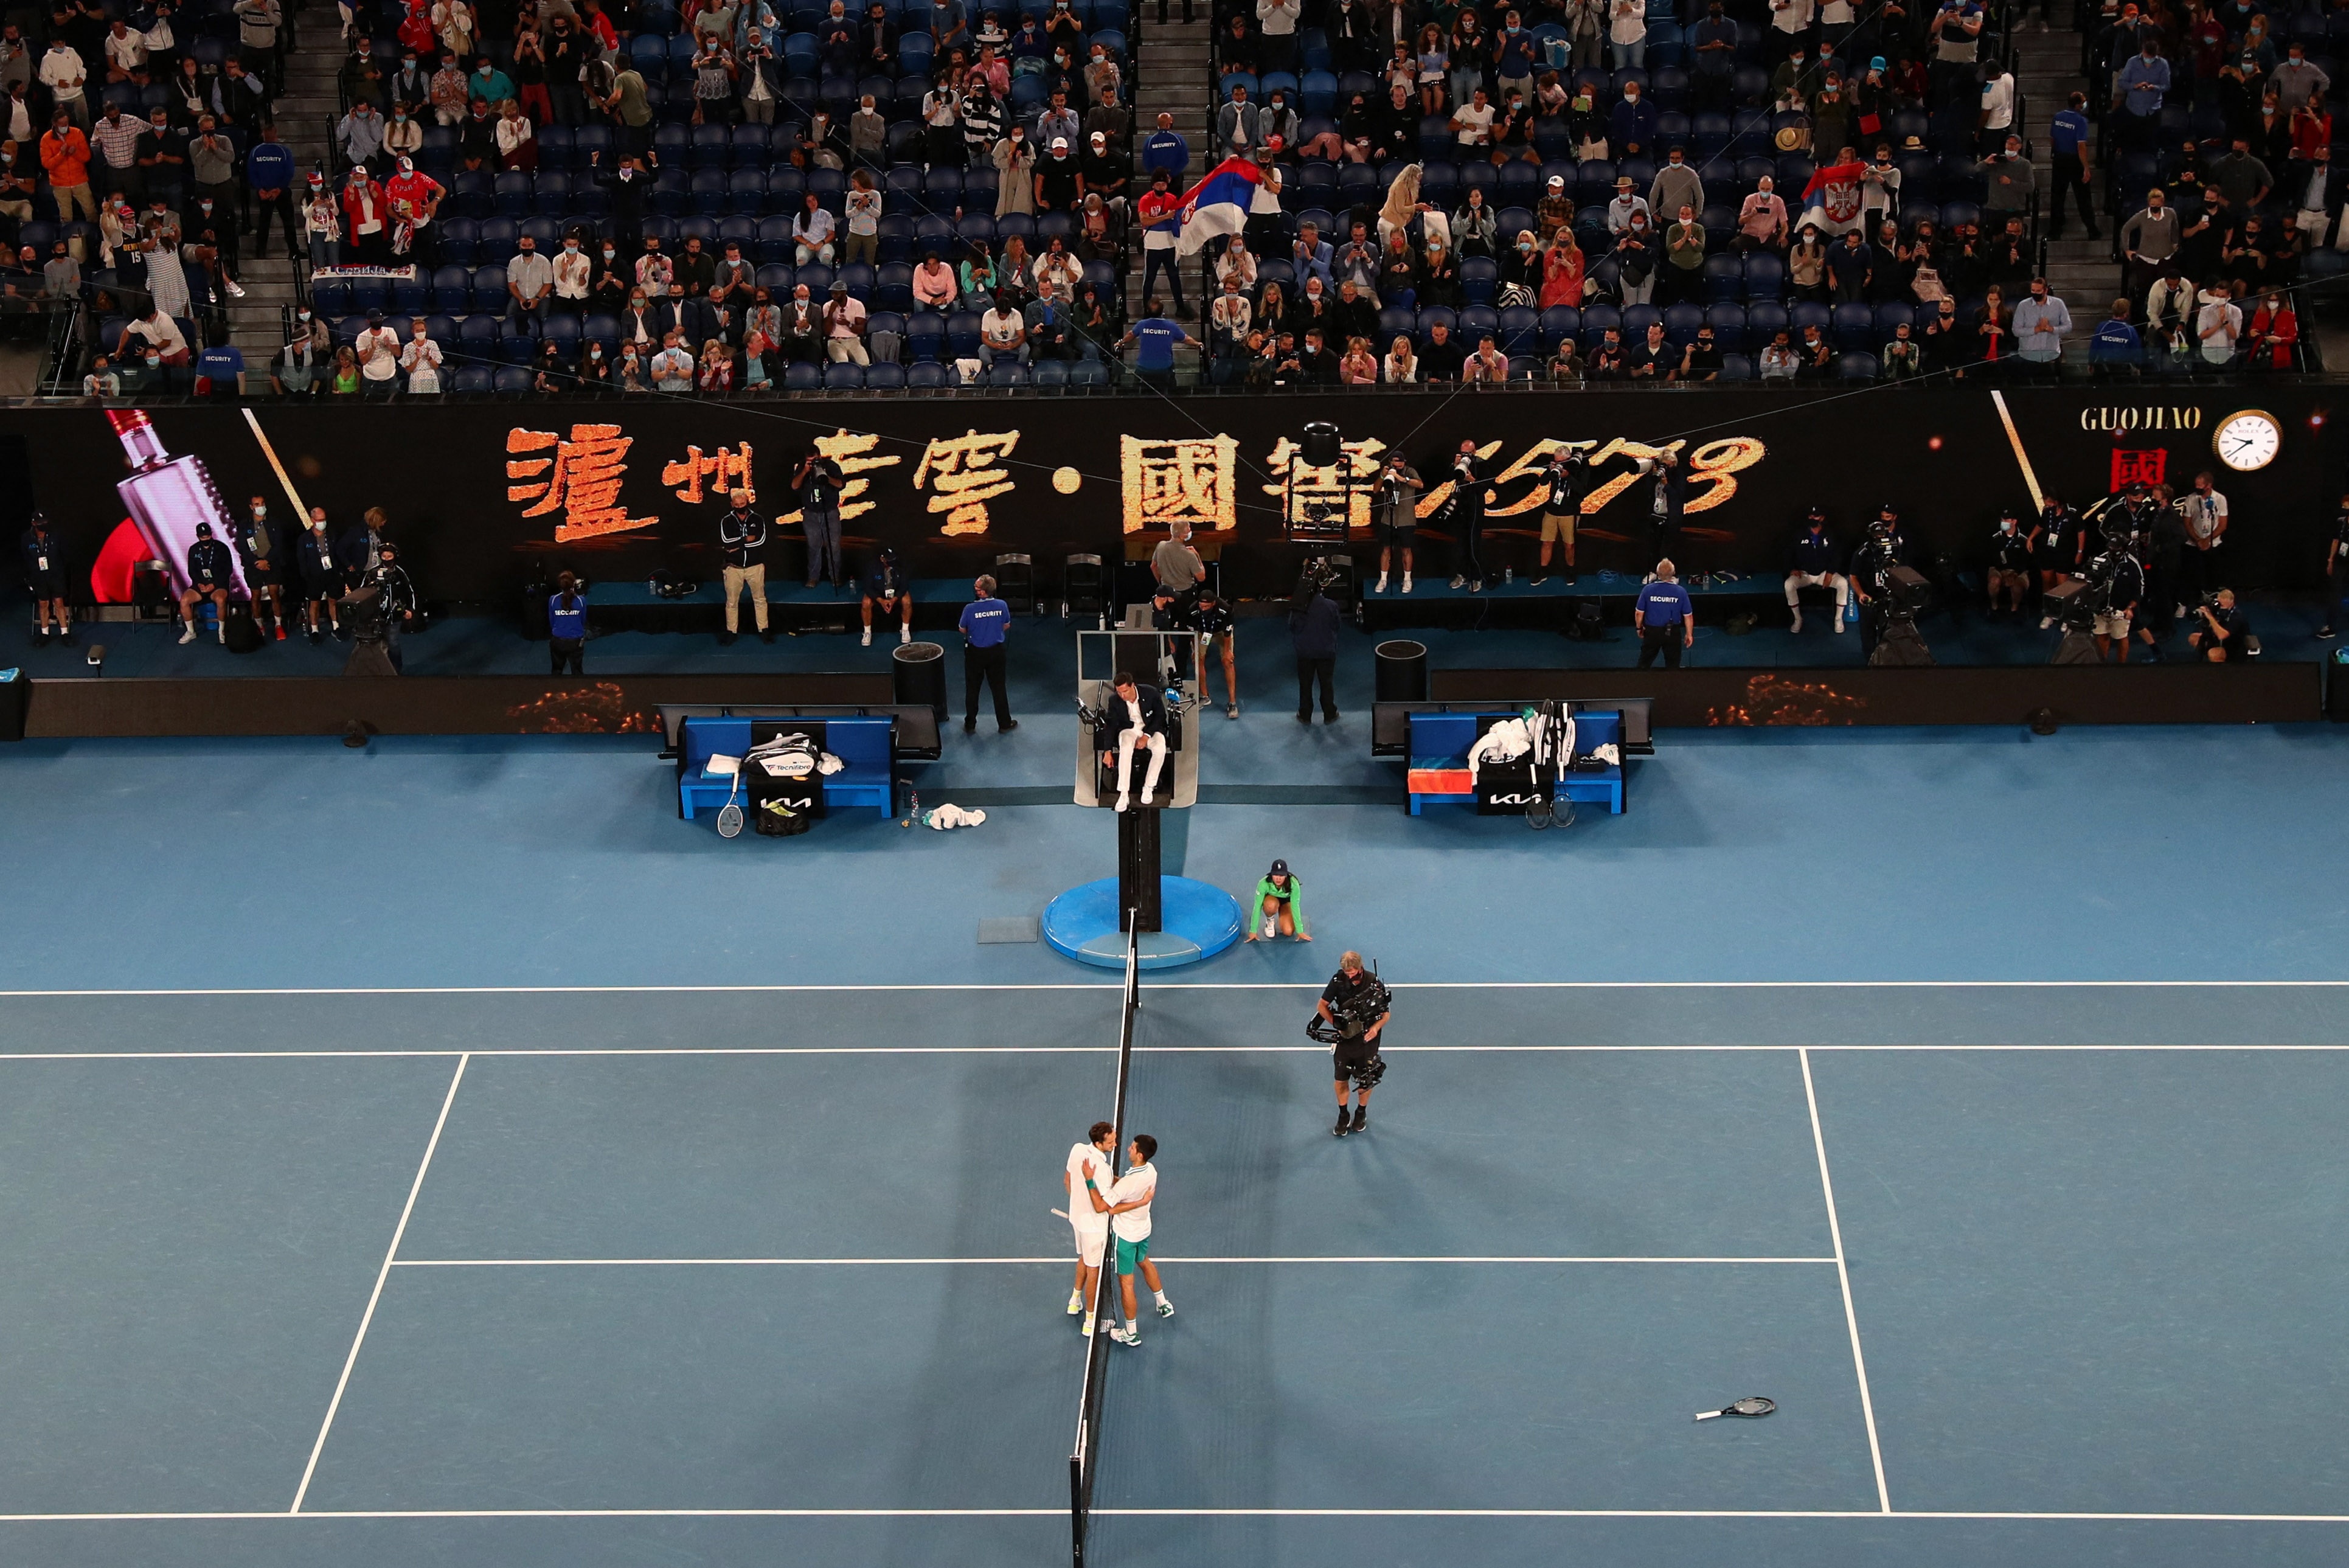 Australian Open at capacity due to COVID | Reuters